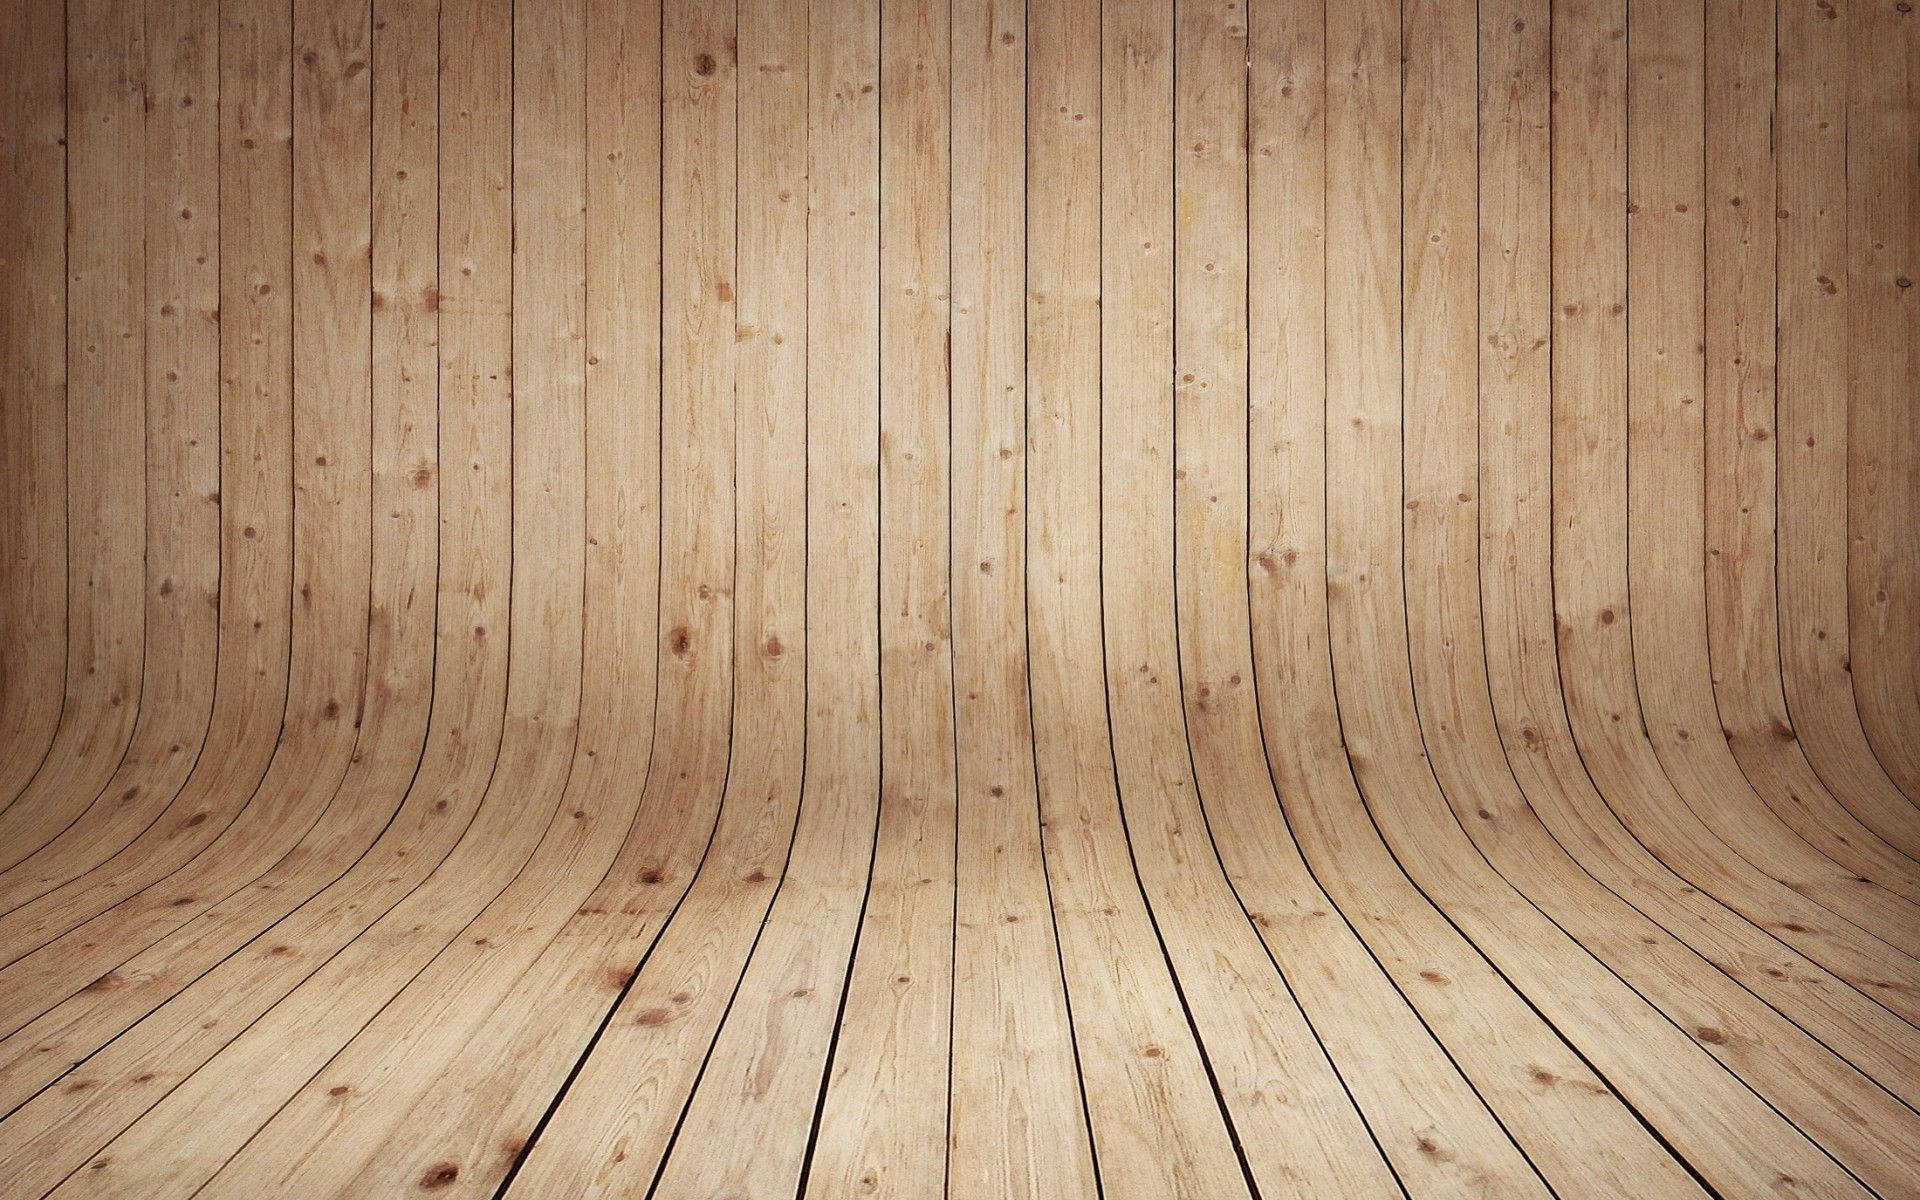 The organic beauty of wooden curves Wallpaper